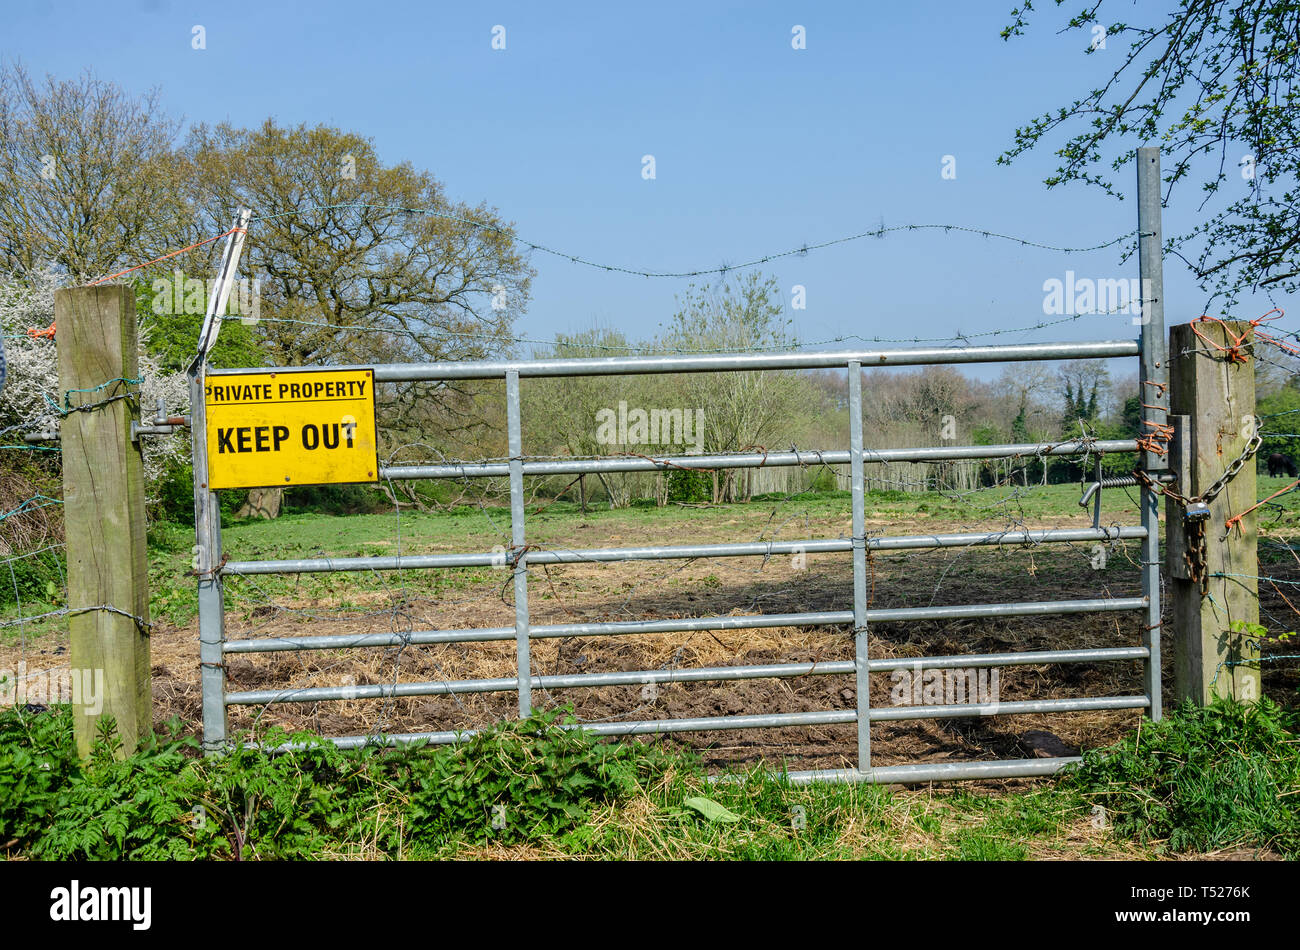 A yellow sign instructing visitors to keep out of private property is attached to a metal gate in South Staffordshire countryside near Perton village. Stock Photo